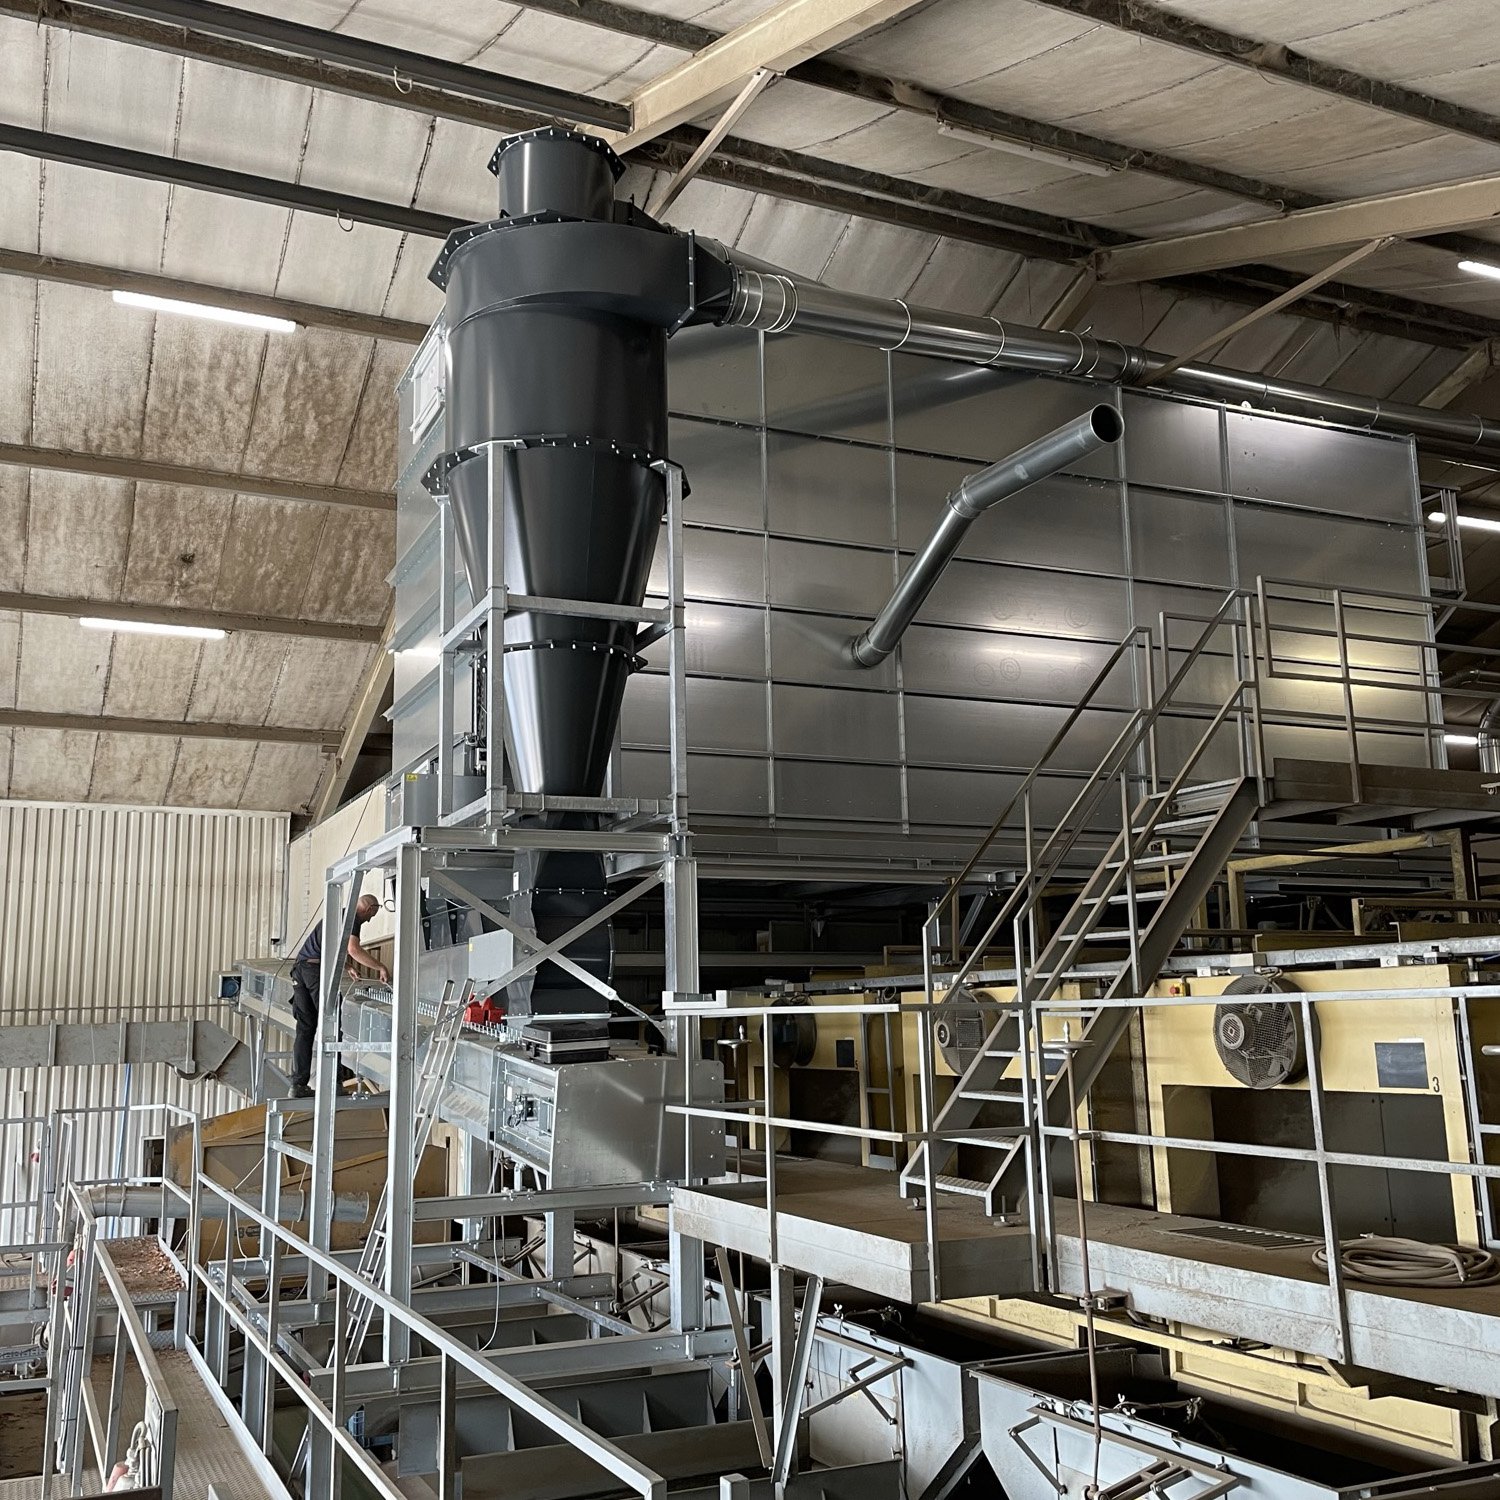 Modesta_Filters_Empowering_Clean_Air_Industrial_Filtration_Dust_Extraction_Collector_System_Deduster_CFB_Conveyor_Filter_with_Belt_IMG_1470.jpg